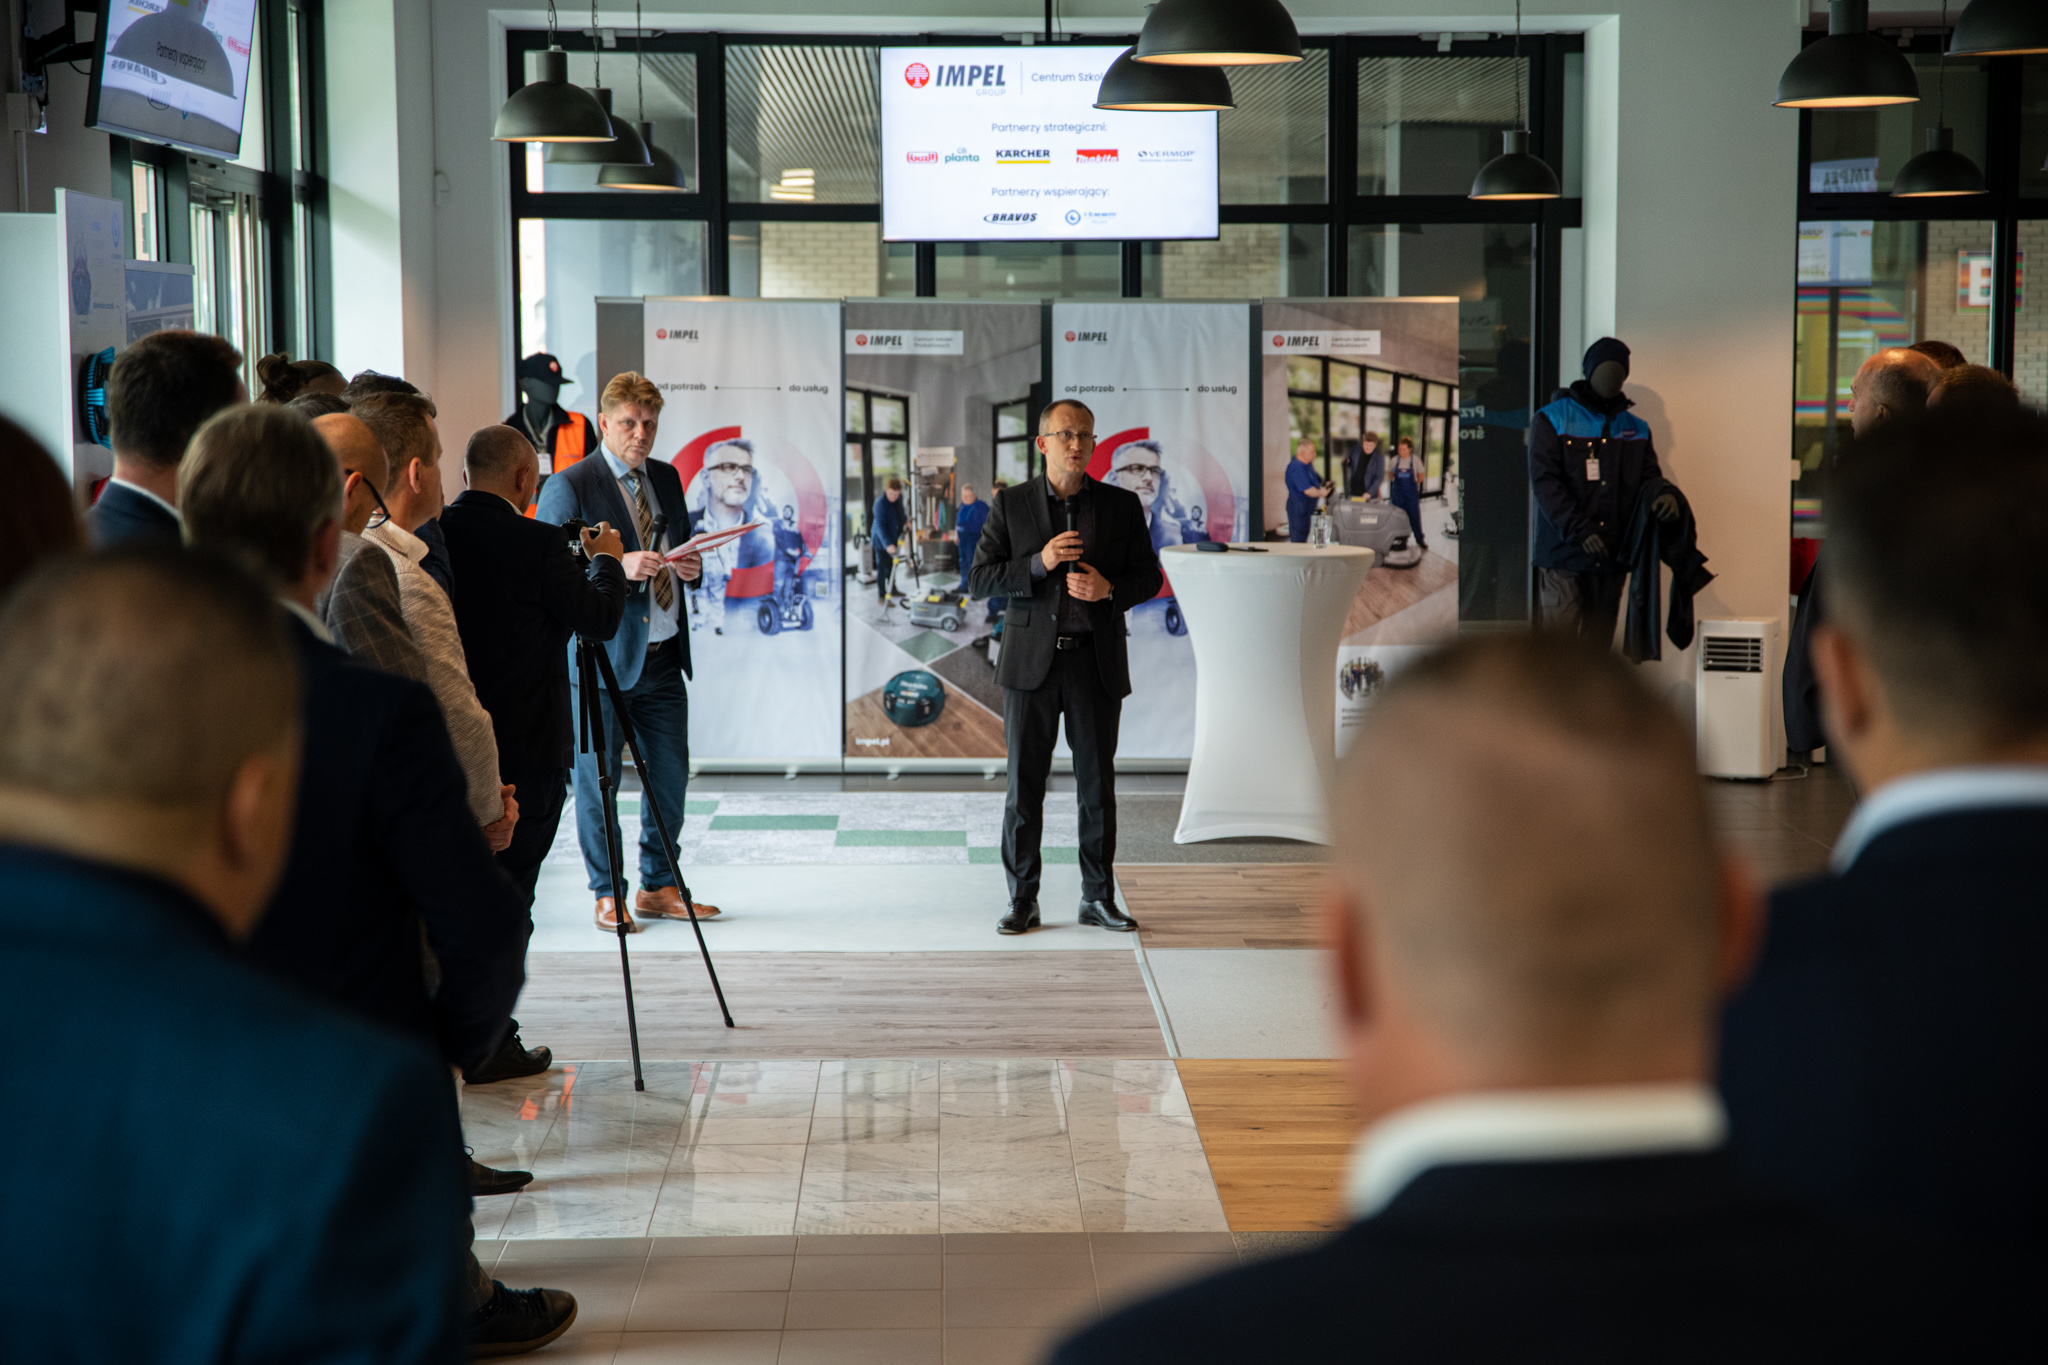 The first fully professional Product Training Center for Facility Management services in Poland was established in Wroclaw